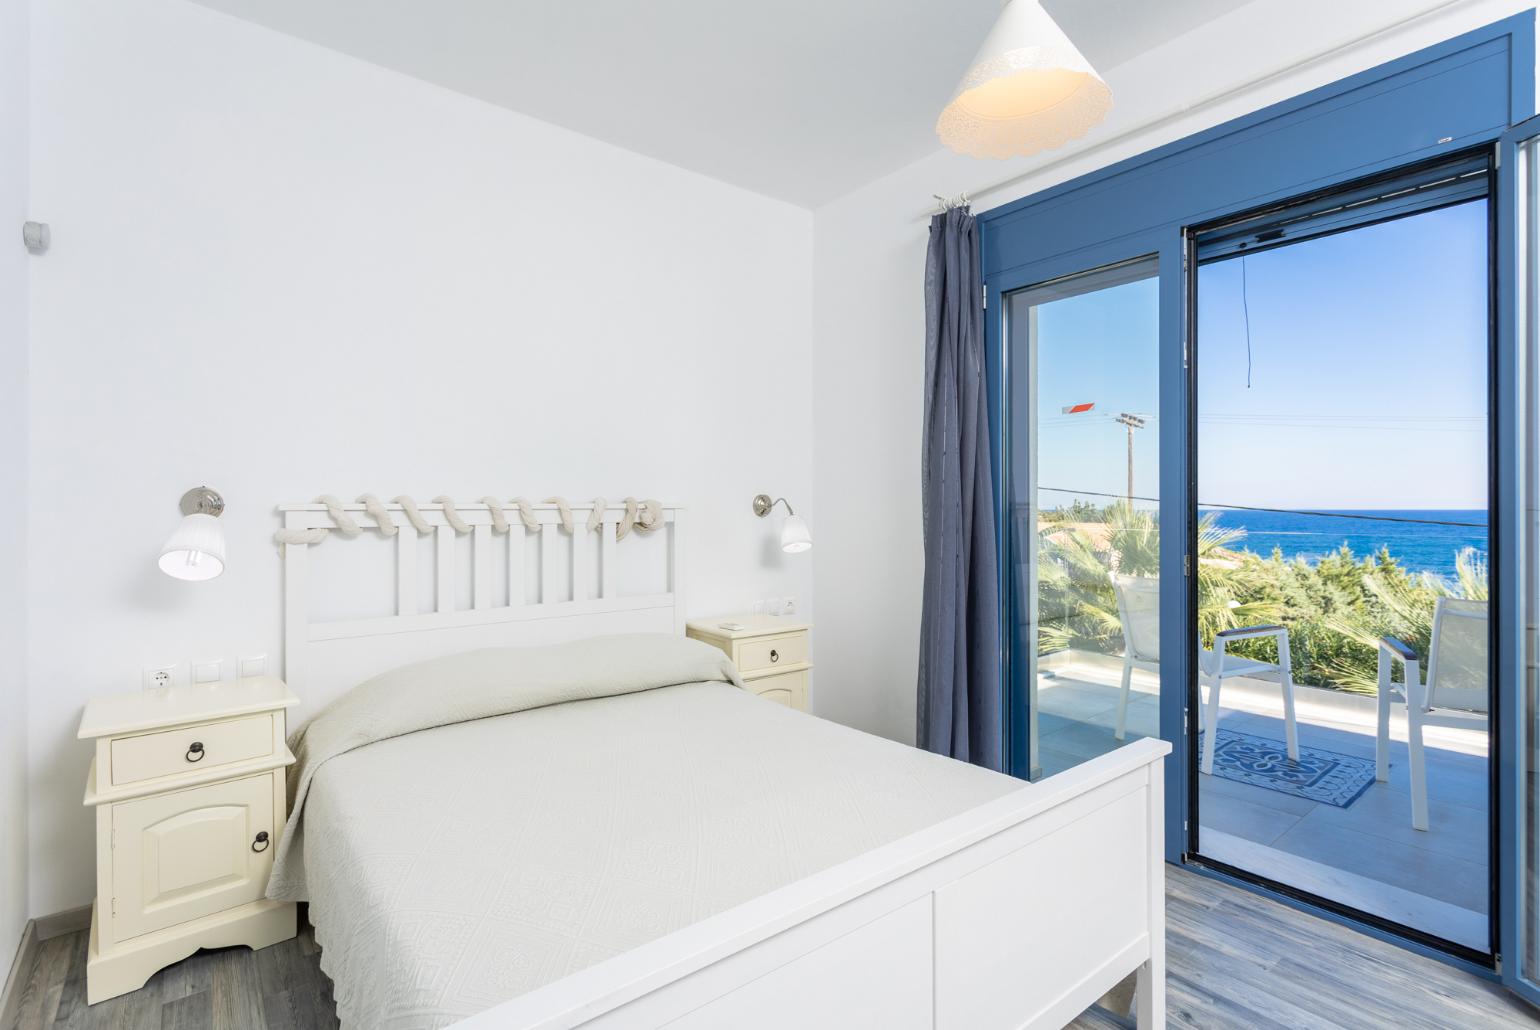 Double bedroom with A/C, sea views, and upper terrace access